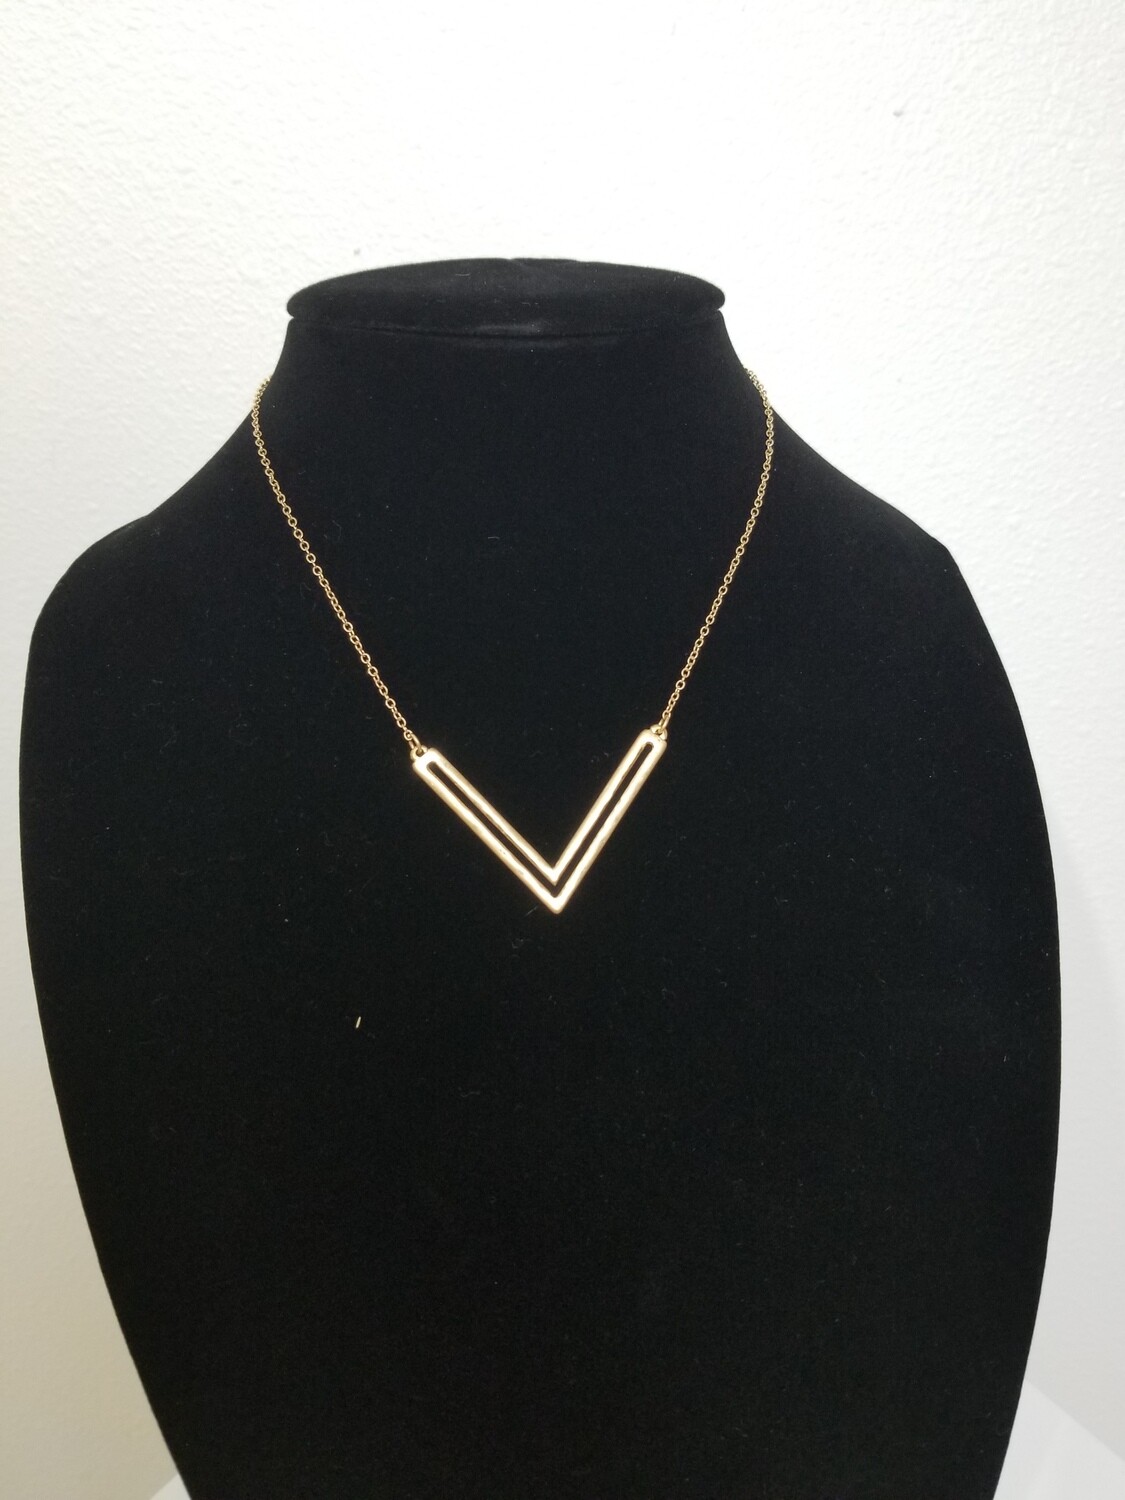 Hammered Cut Out Chevron Pendant